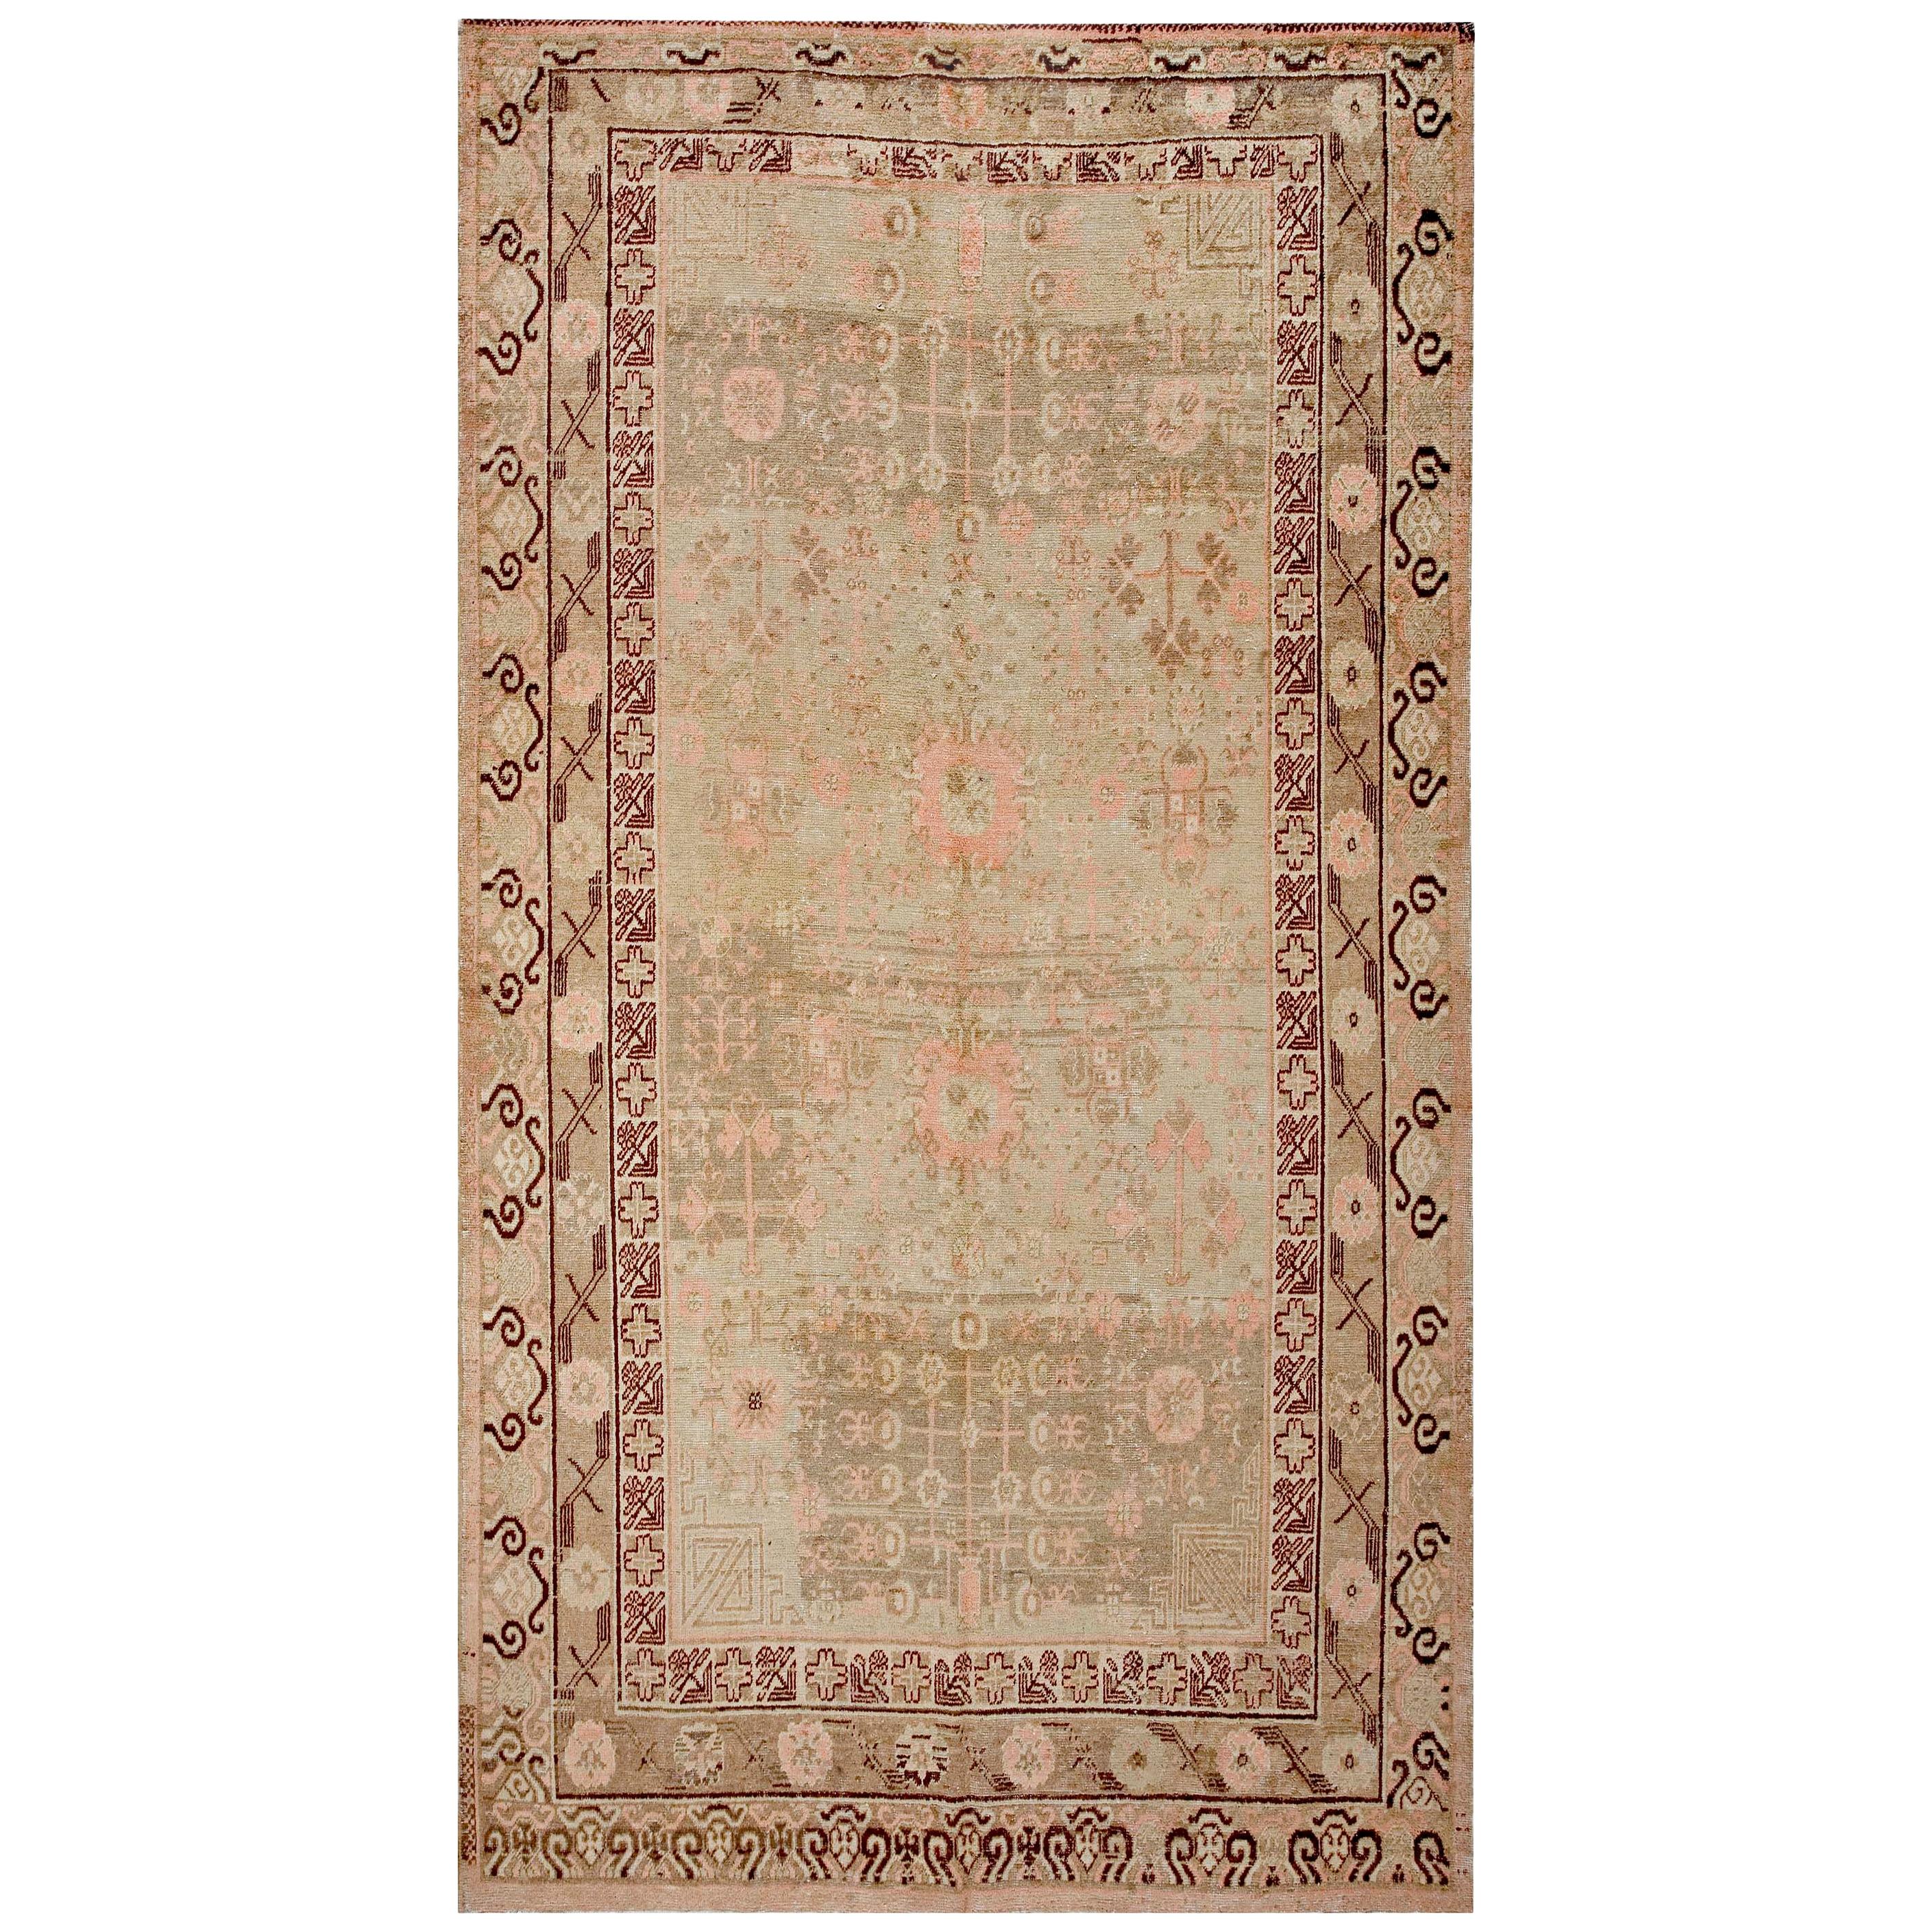 Early 20th Century Central Asian Chinese Khotan Carpet ( 6'4" x 12 -193 x 365 )